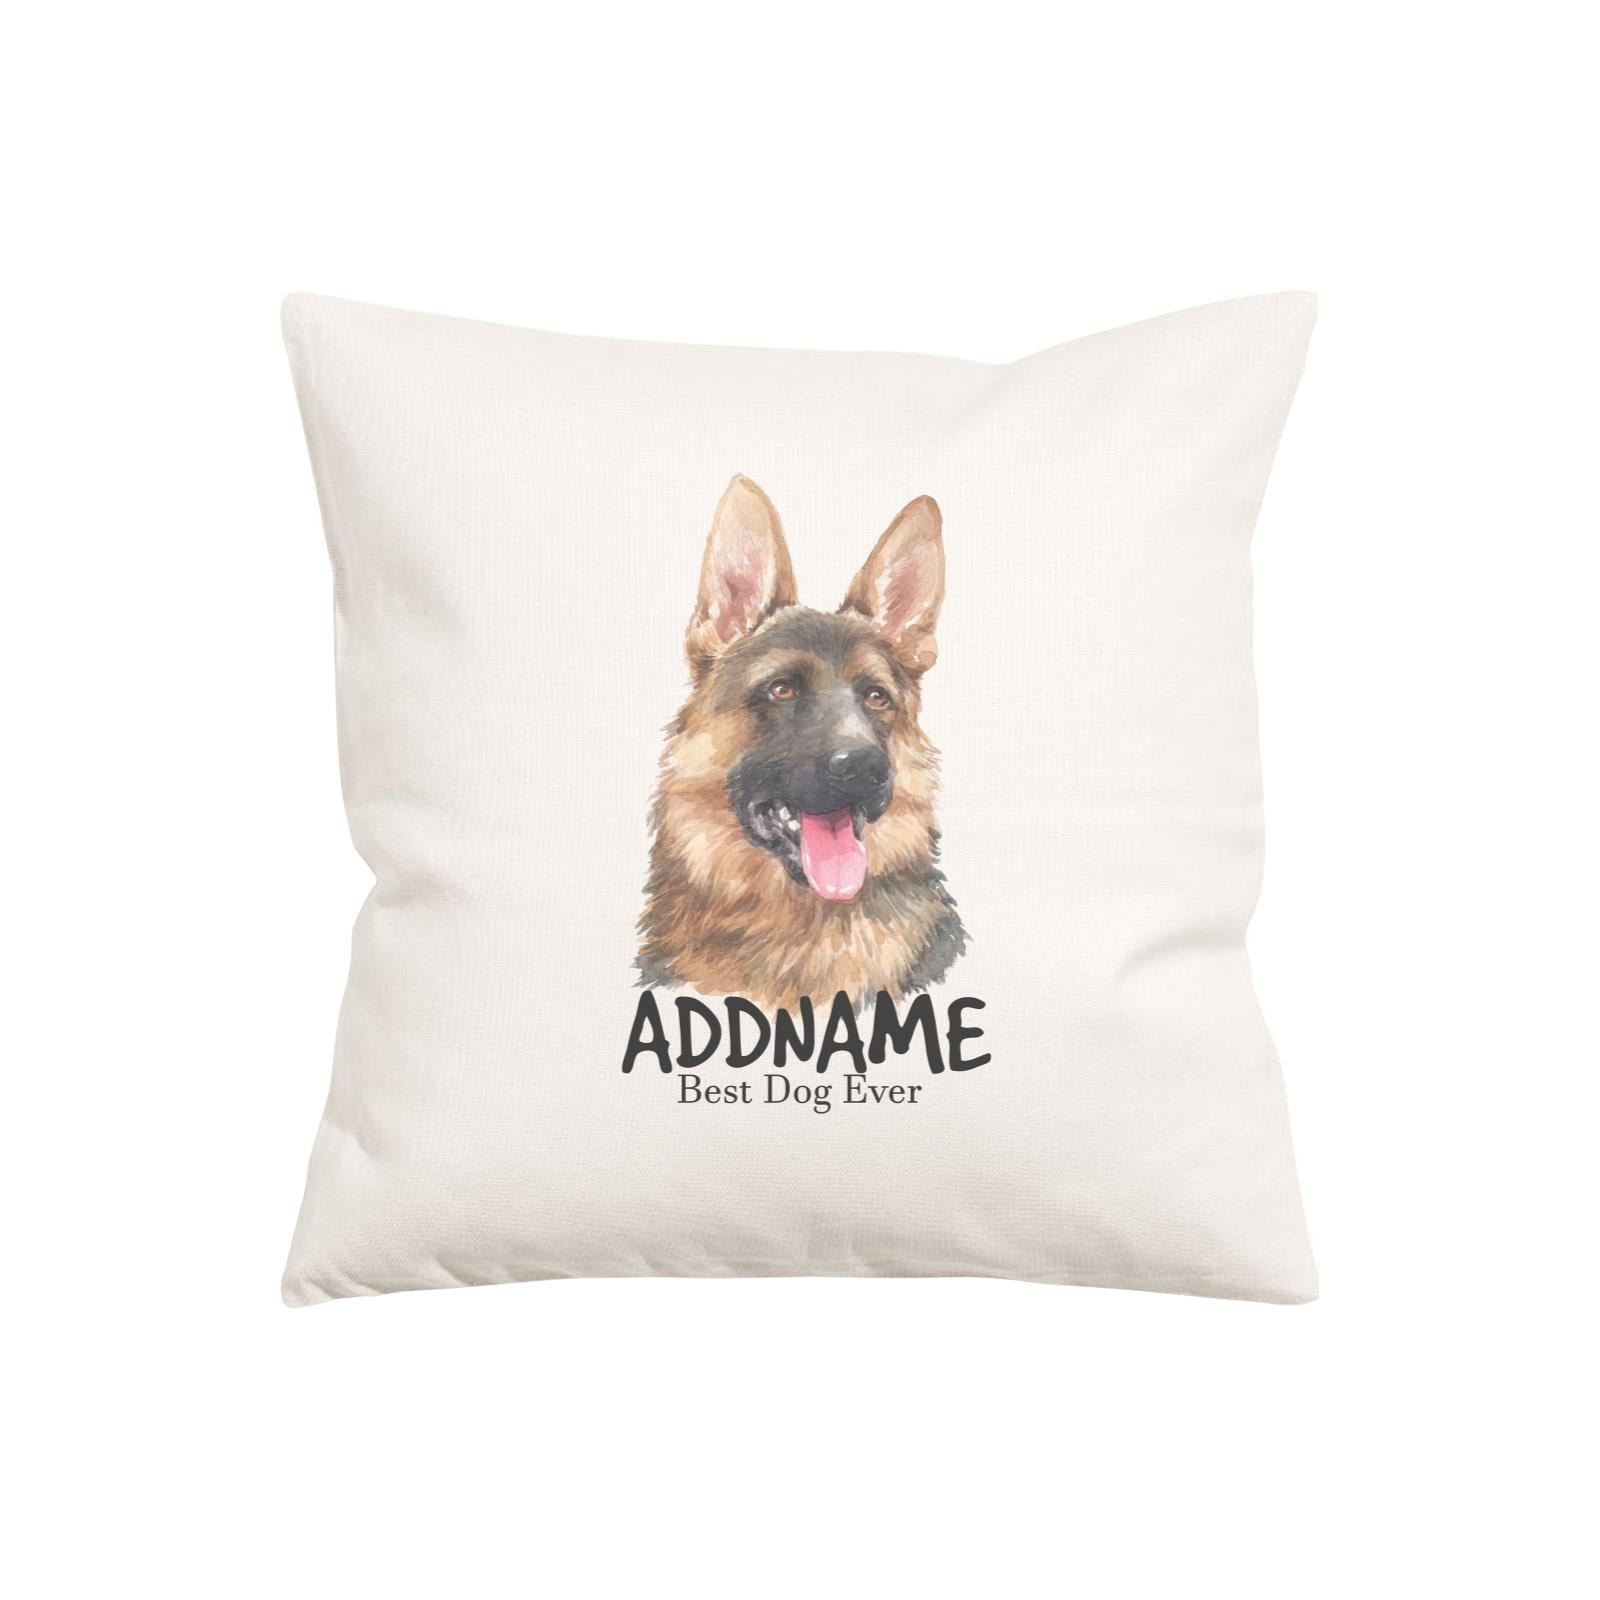 Watercolor Dog Series German Shepherd Best Dog Ever Addname Pillow Cushion